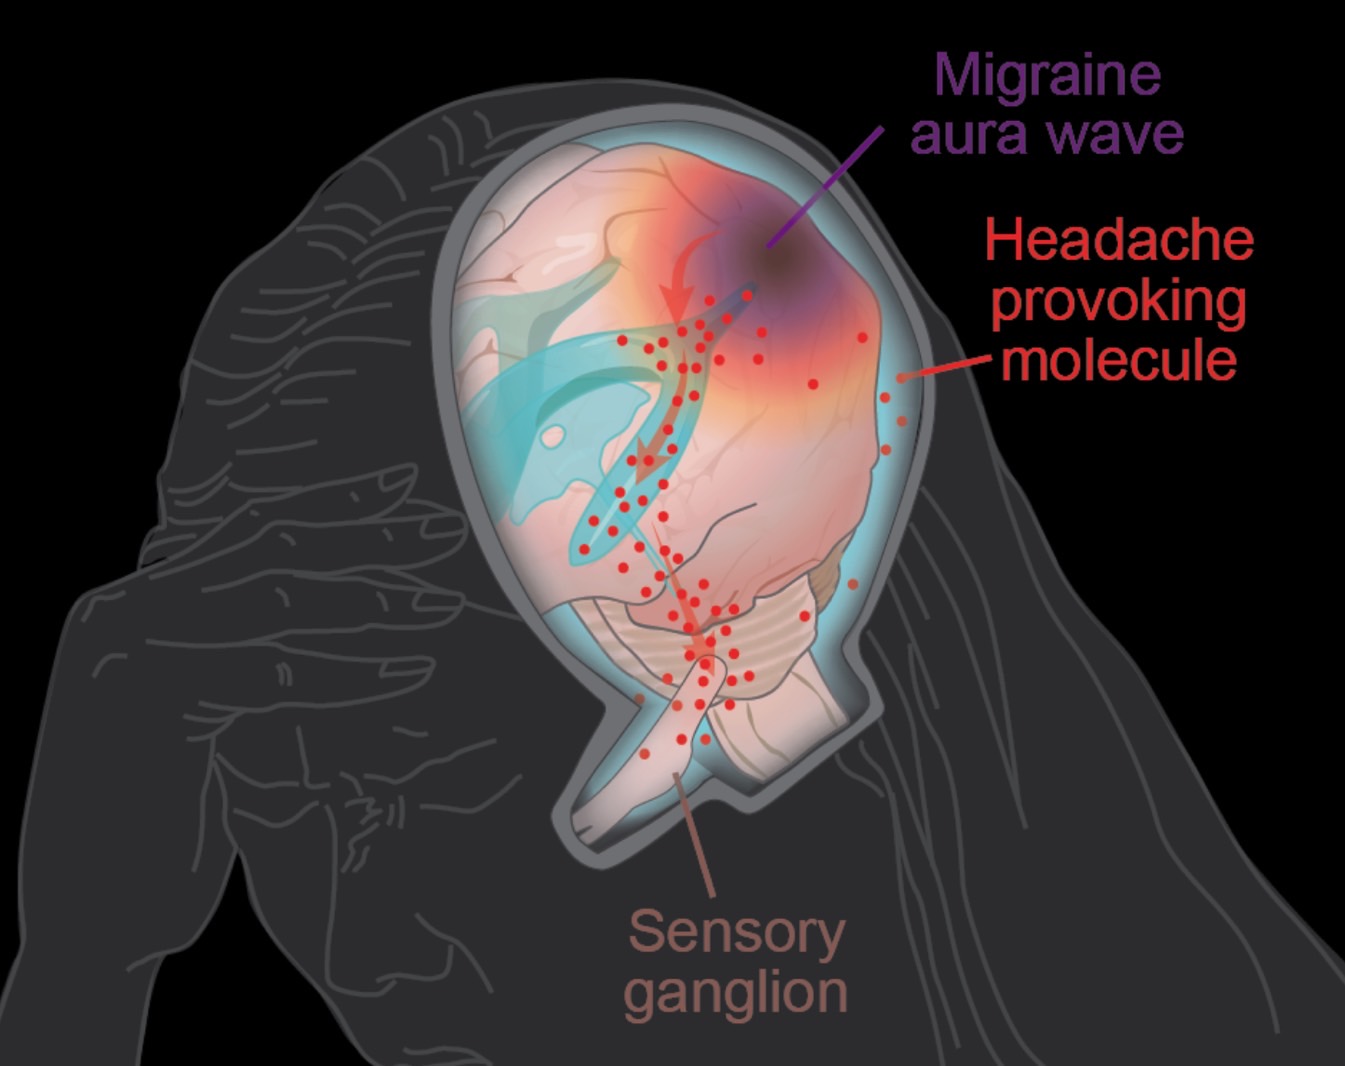 Study explains how headaches happen in migraines after the initial aura.